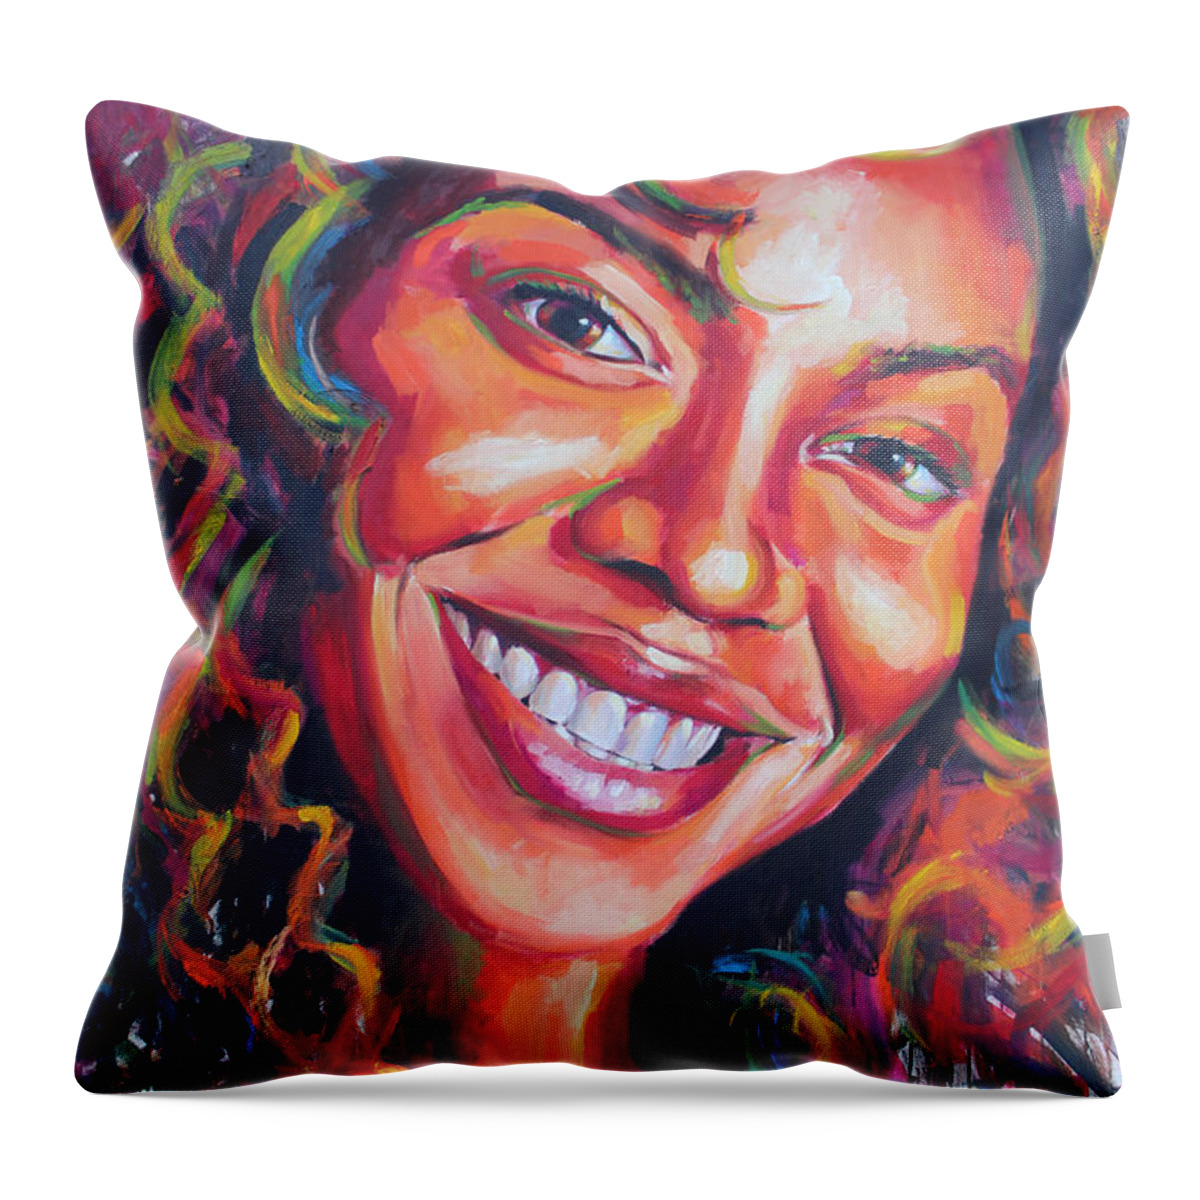 Beyonce Throw Pillow featuring the painting Beyonce by Tachi Pintor